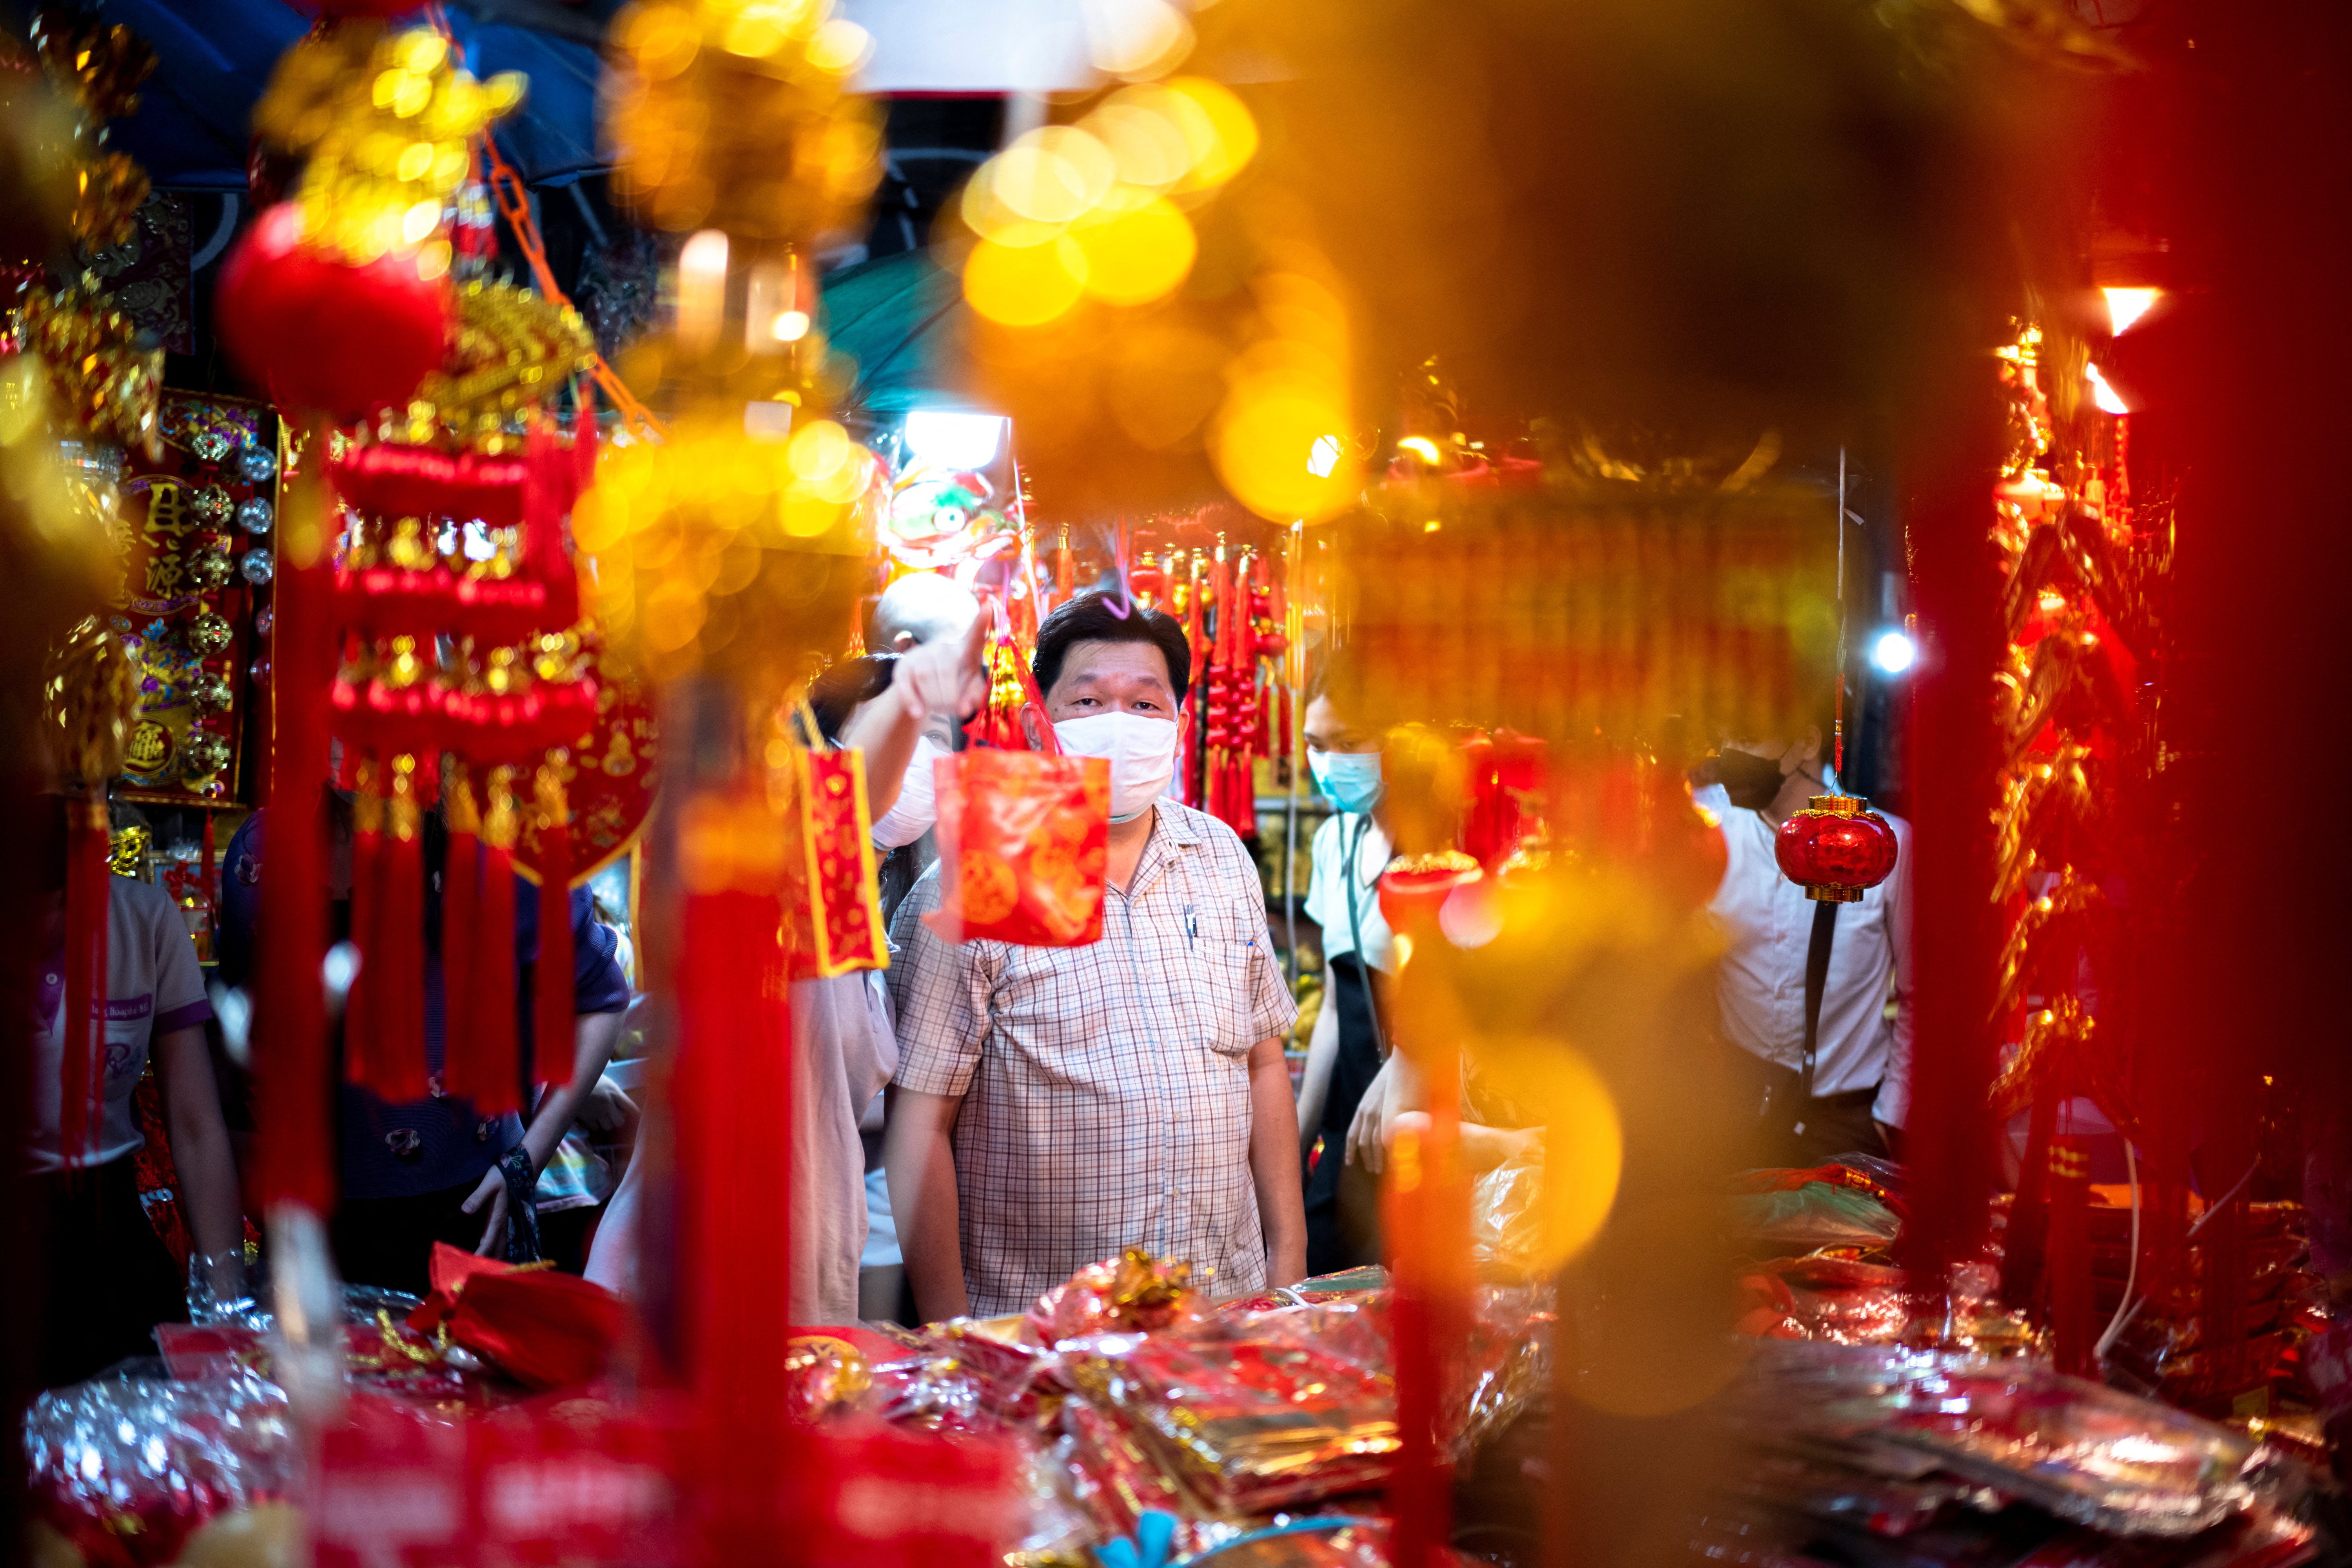 A man wearing a face mask shops ahead of the Chinese Lunar New Year celebrations in Bangkok, Thailand